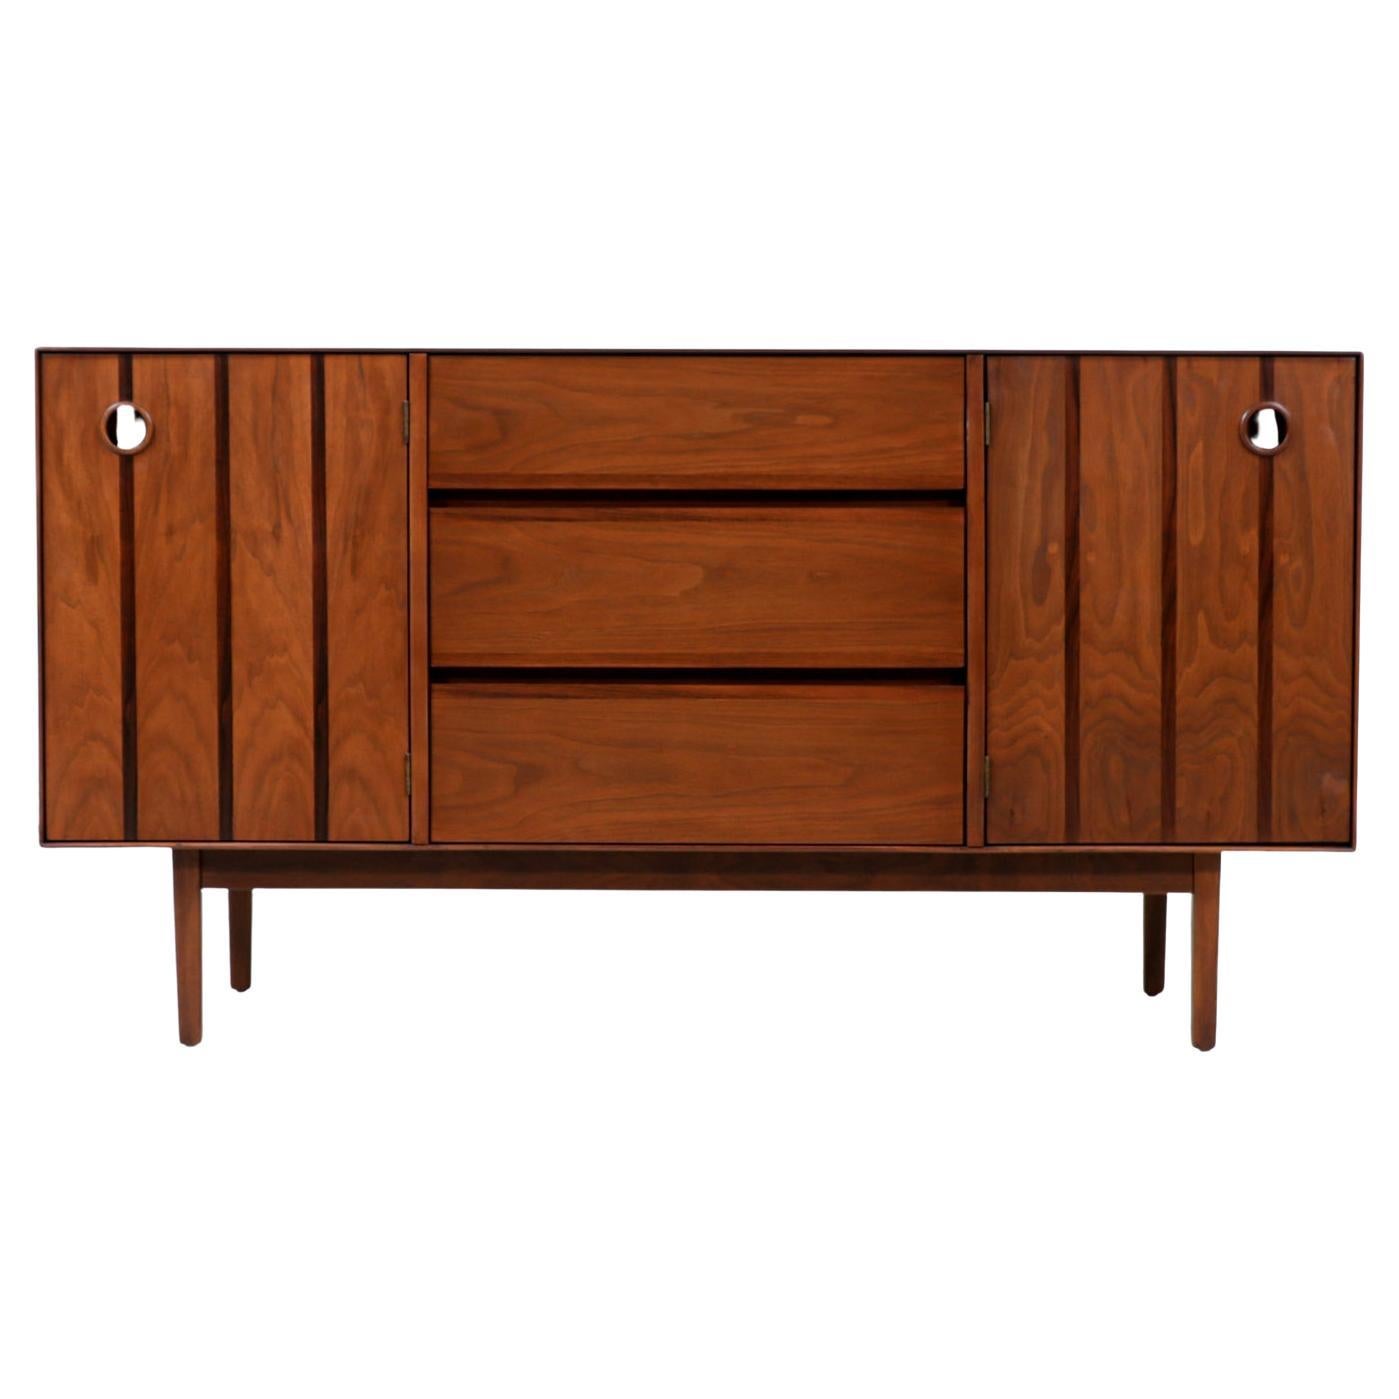 Mid-Century Modern Walnut Credenza with Rosewood Inlaid by Stanley Furniture